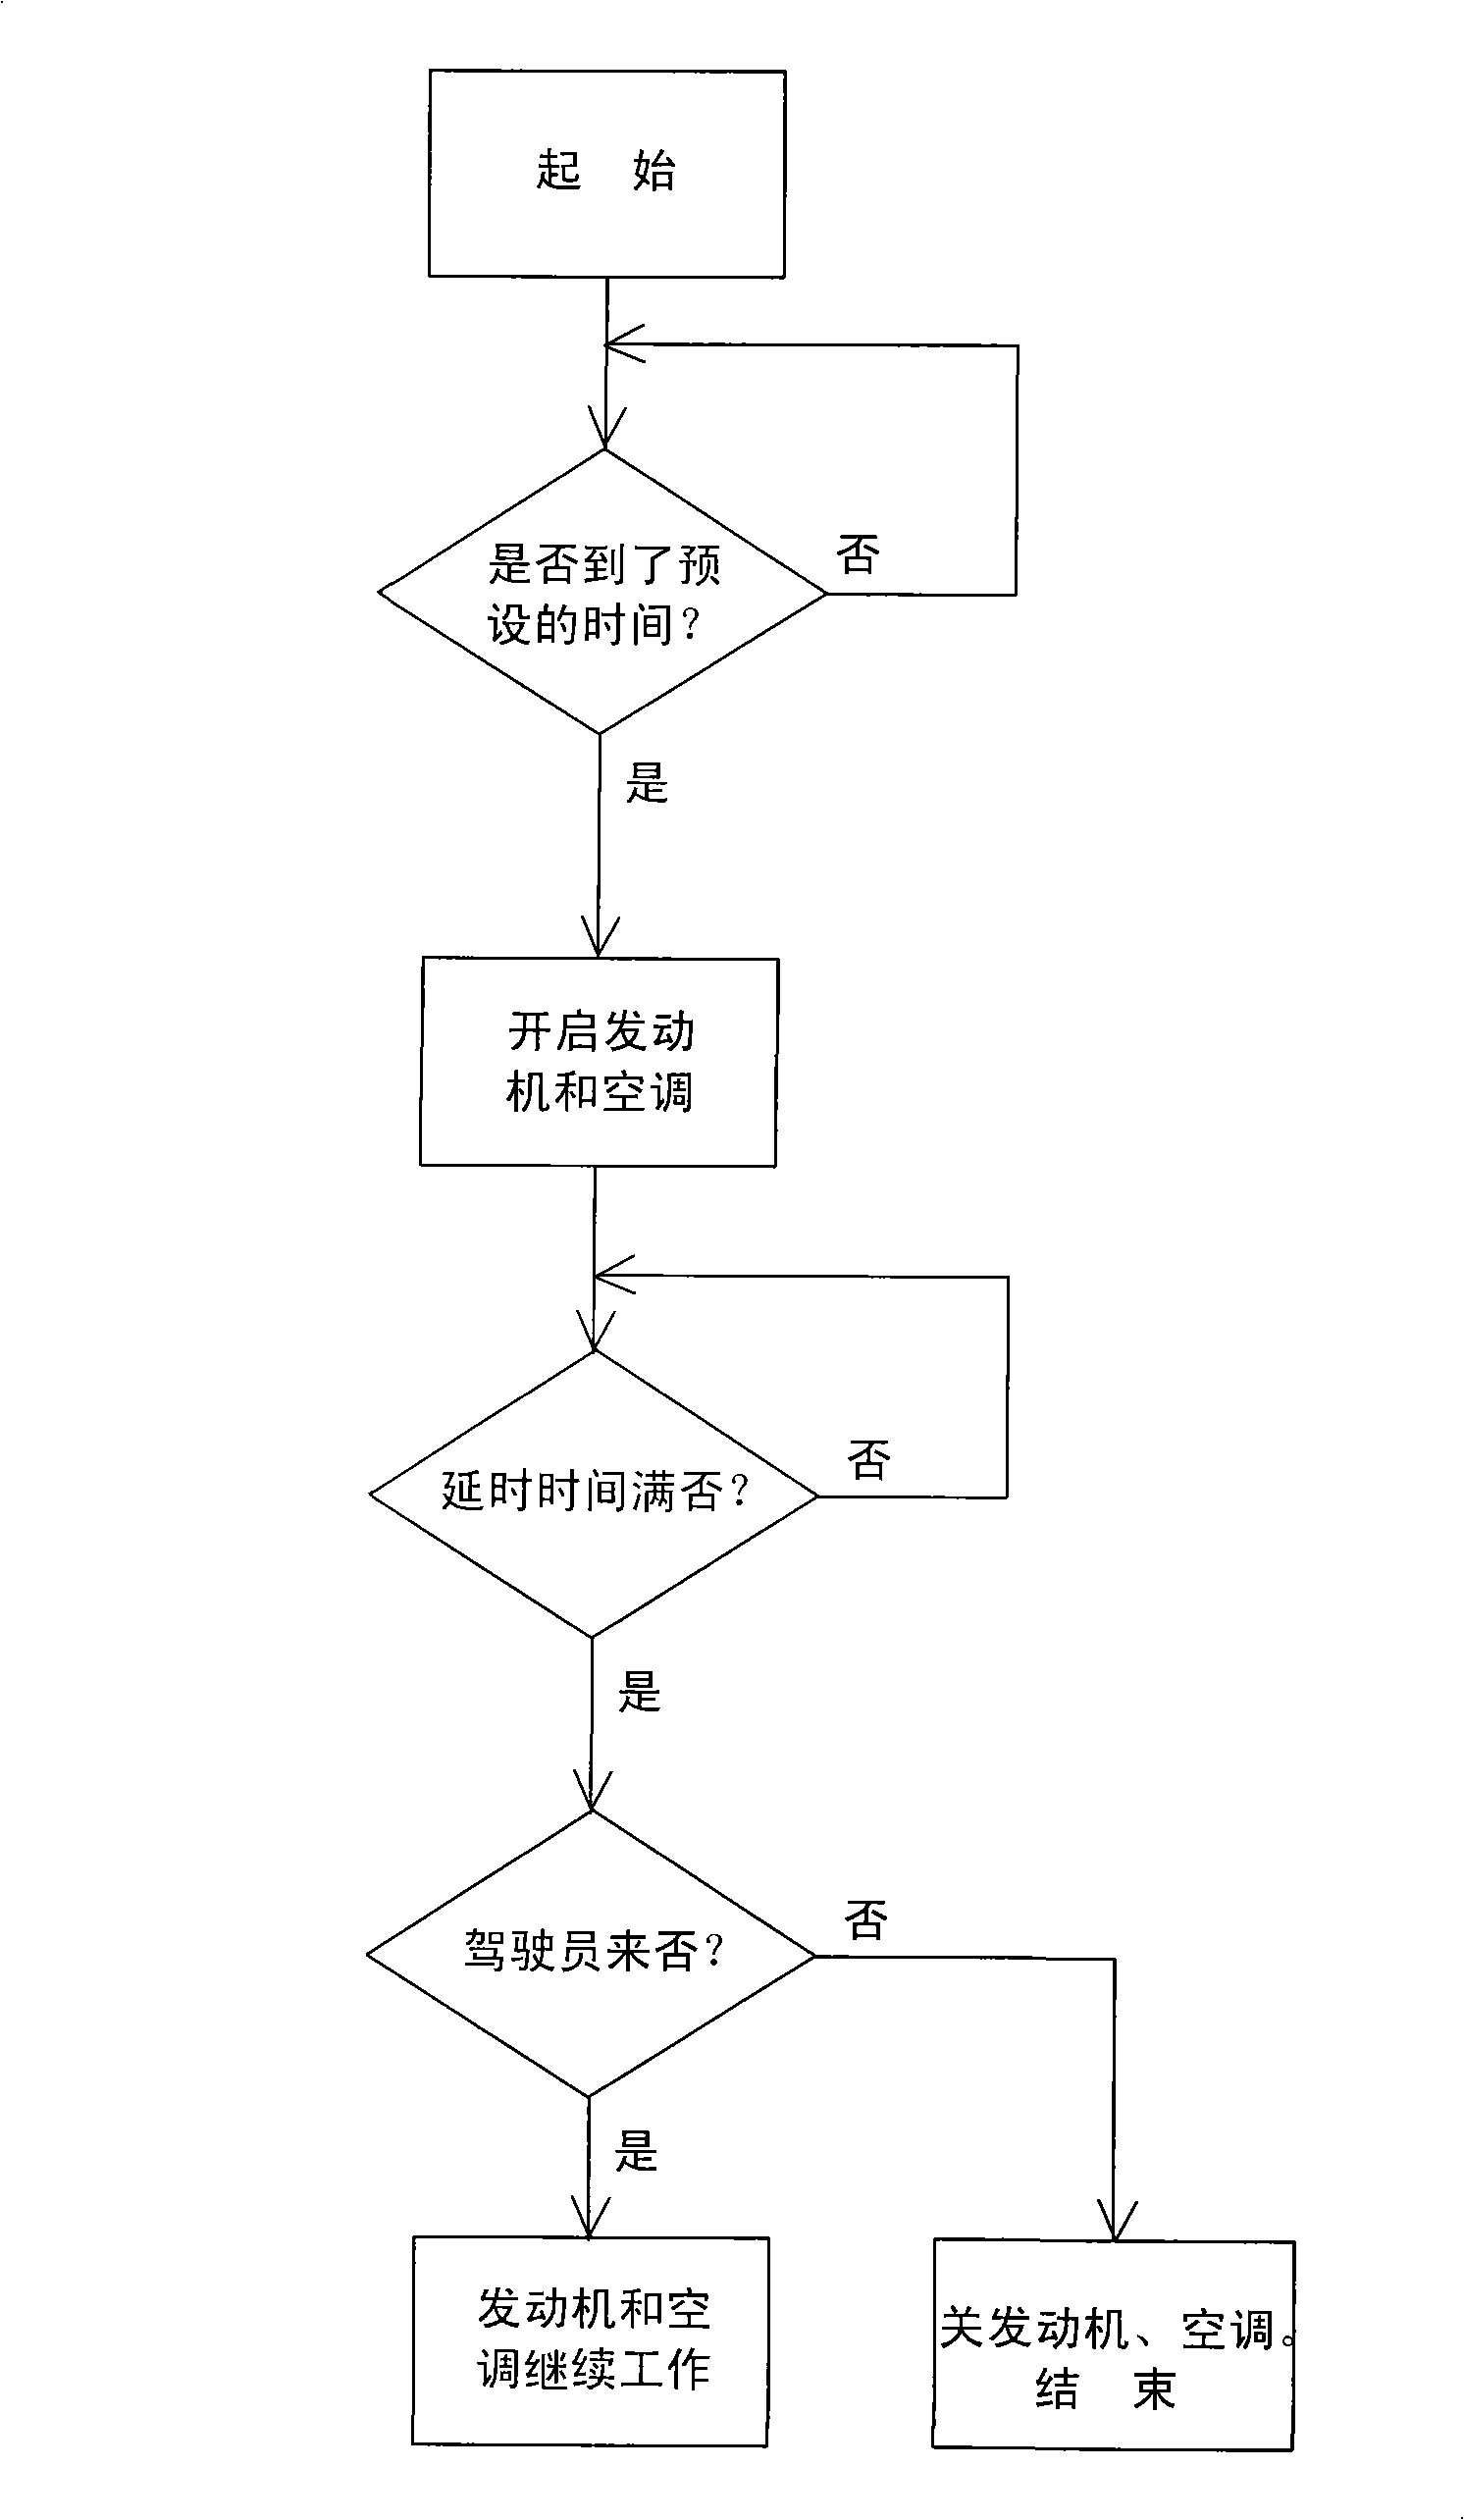 Method for preset opening of automobile air conditioner